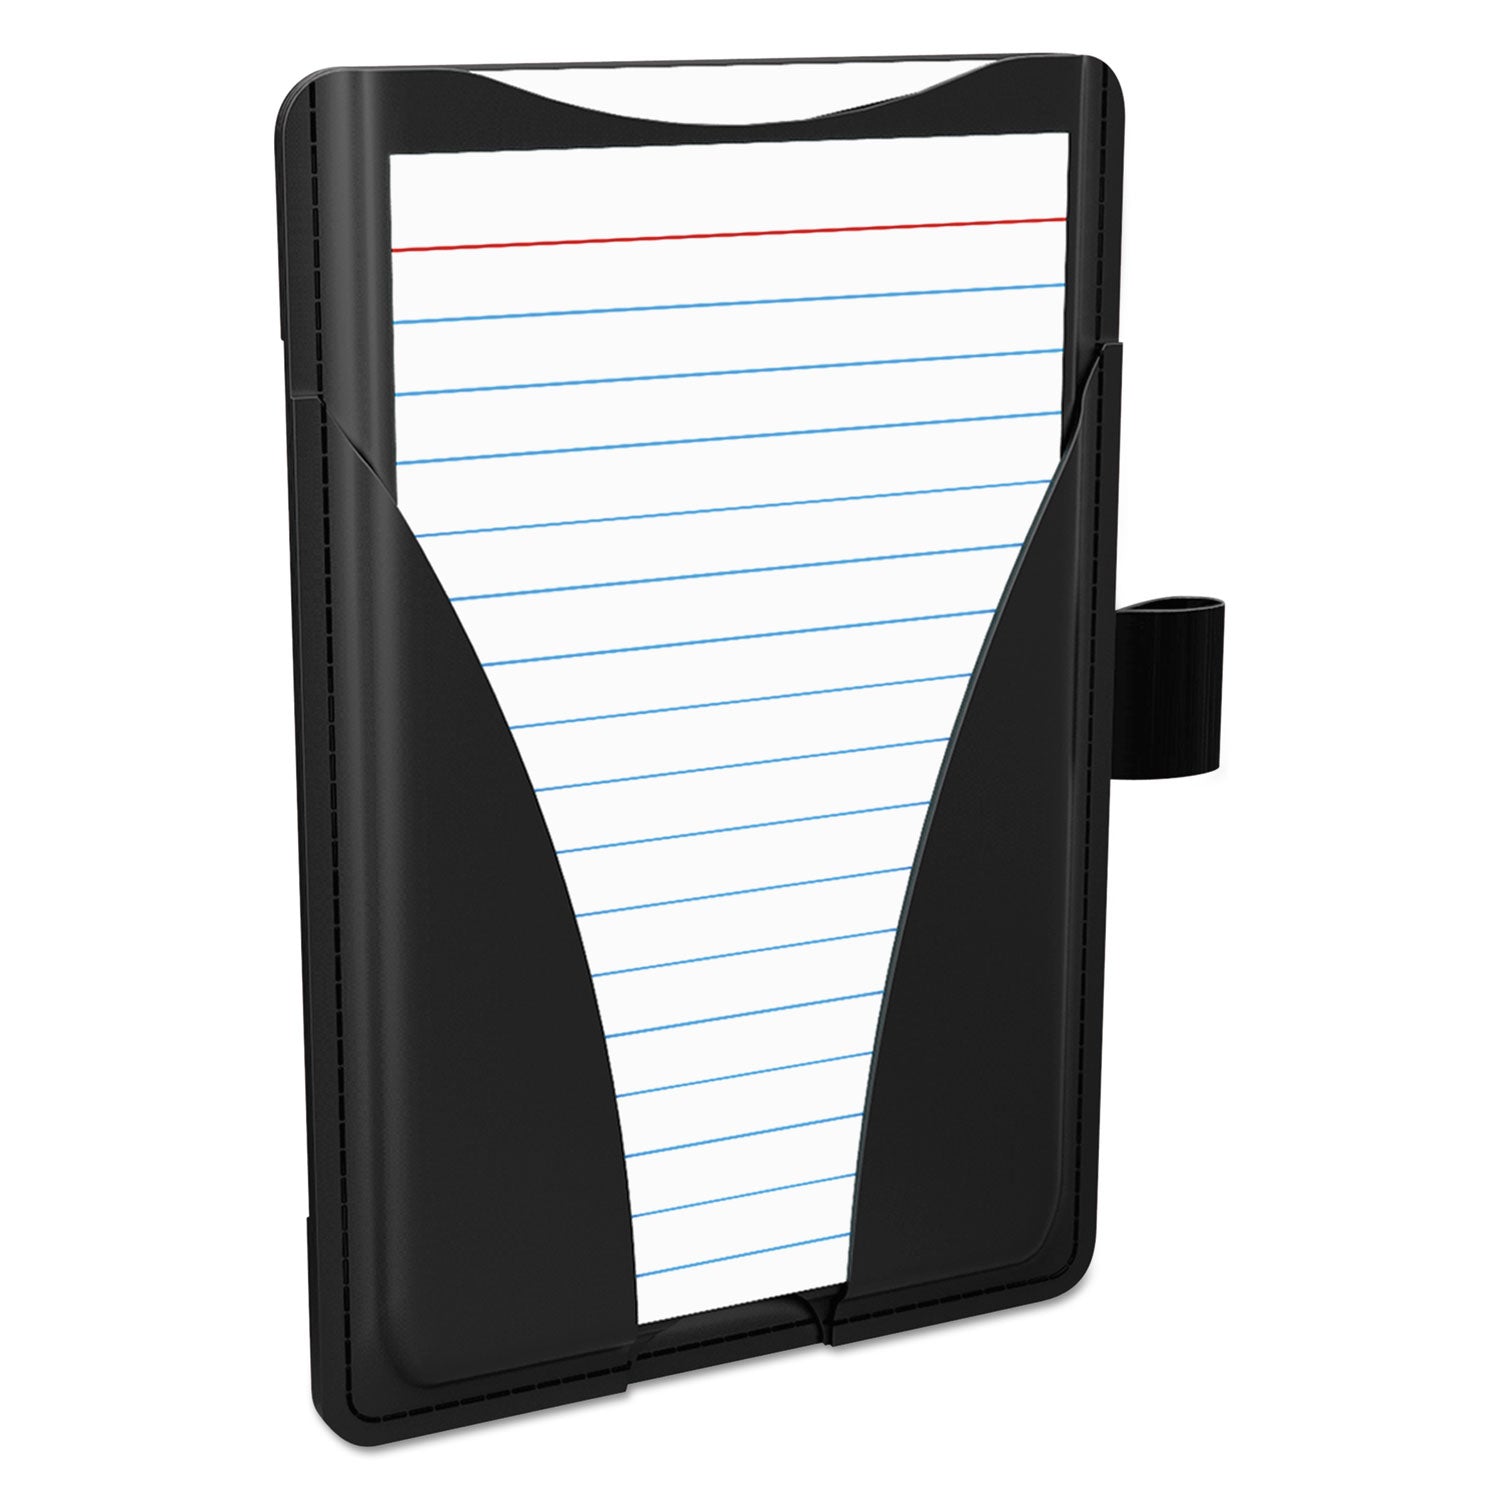 At Hand Note Card Case, Holds 25 3 x 5 Cards, 5.5 x 3.75 x 5.33, Poly, Black - 